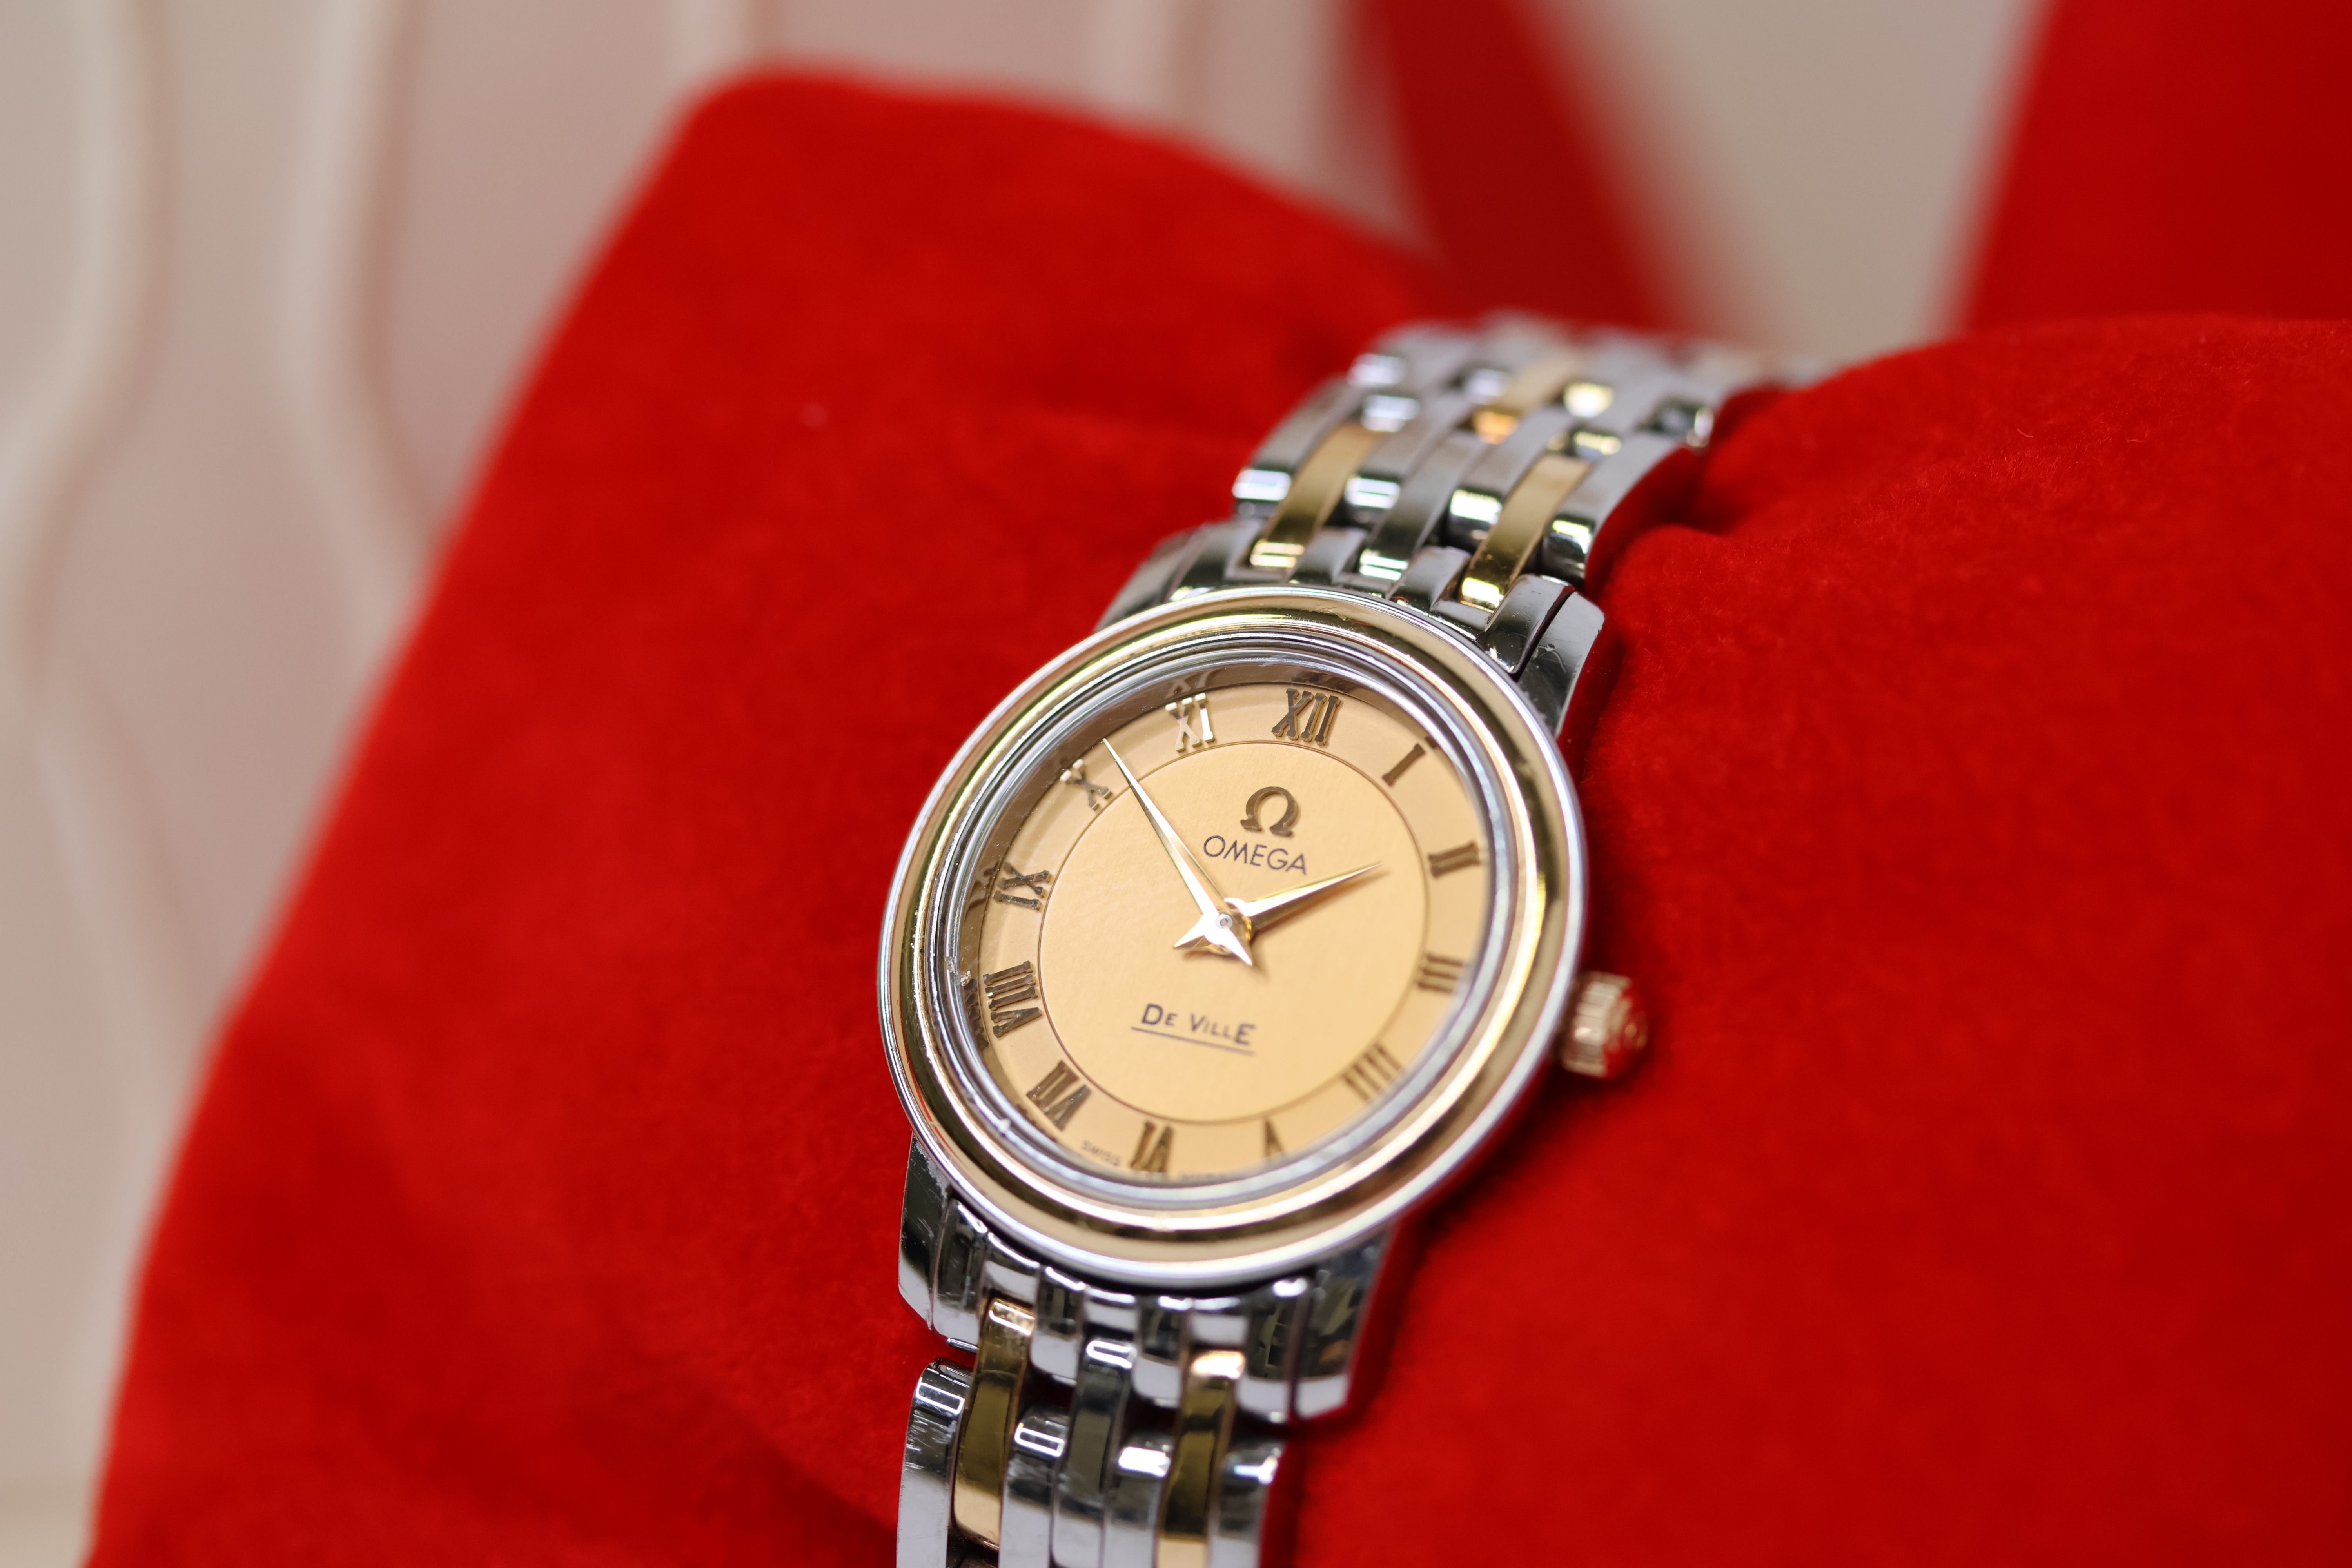 LADIES OMEGA DE VILLE PRESTIGE REFERENCE 43701200 CIRCA 2011 WITH BOX AND PAPERS - Image 4 of 9